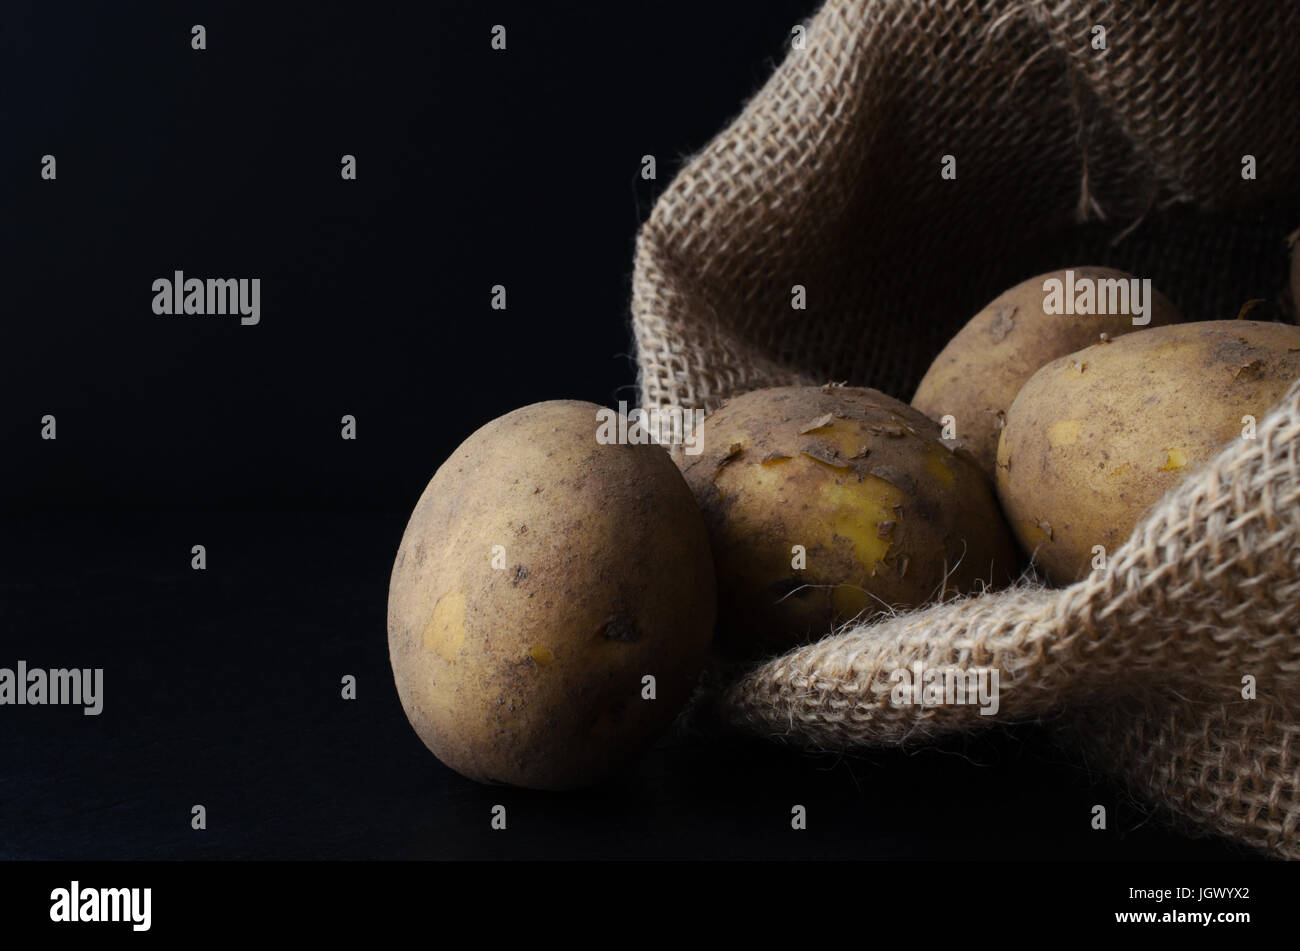 Raw, unwashed, unpeeled potatoes, spilling out of hessian sack on to black slate surface.  Moody lighting, black background. Stock Photo